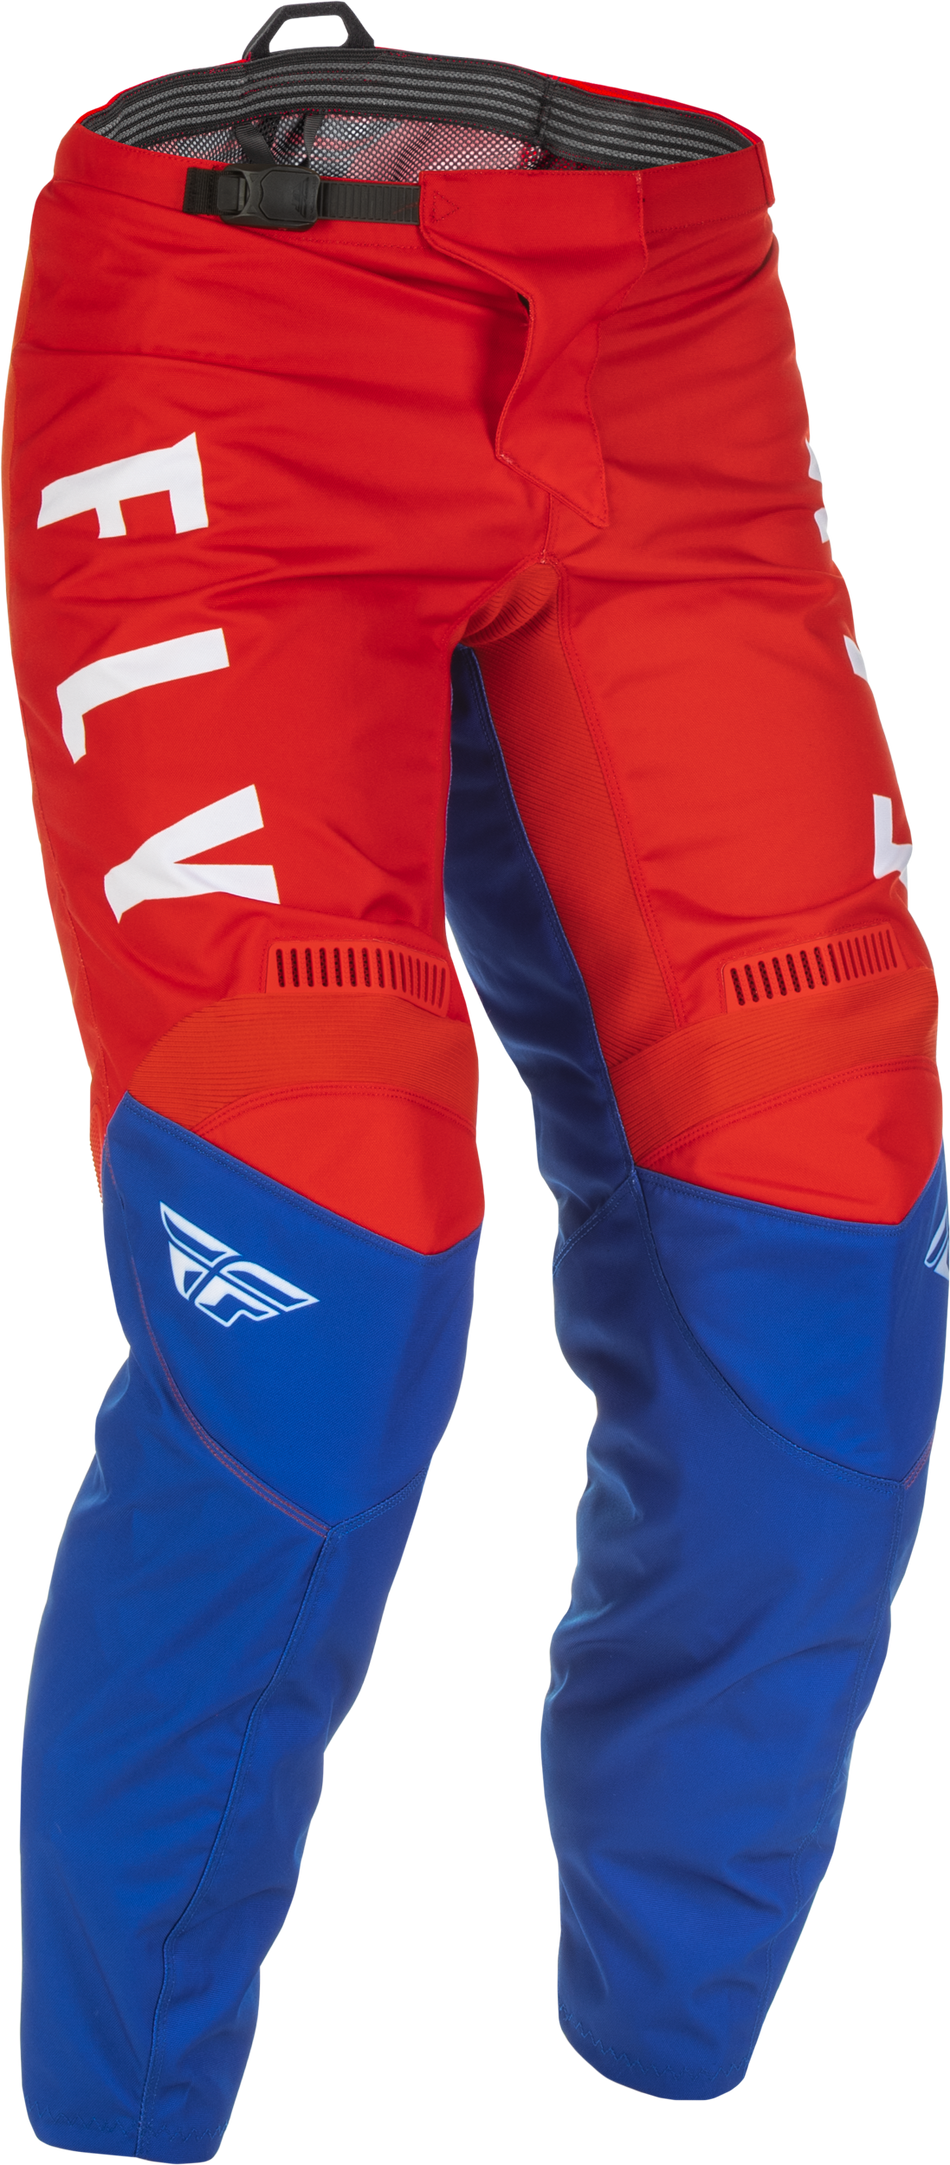 FLY RACING F-16 Pants Red/White/Blue Sz 32 375-93432